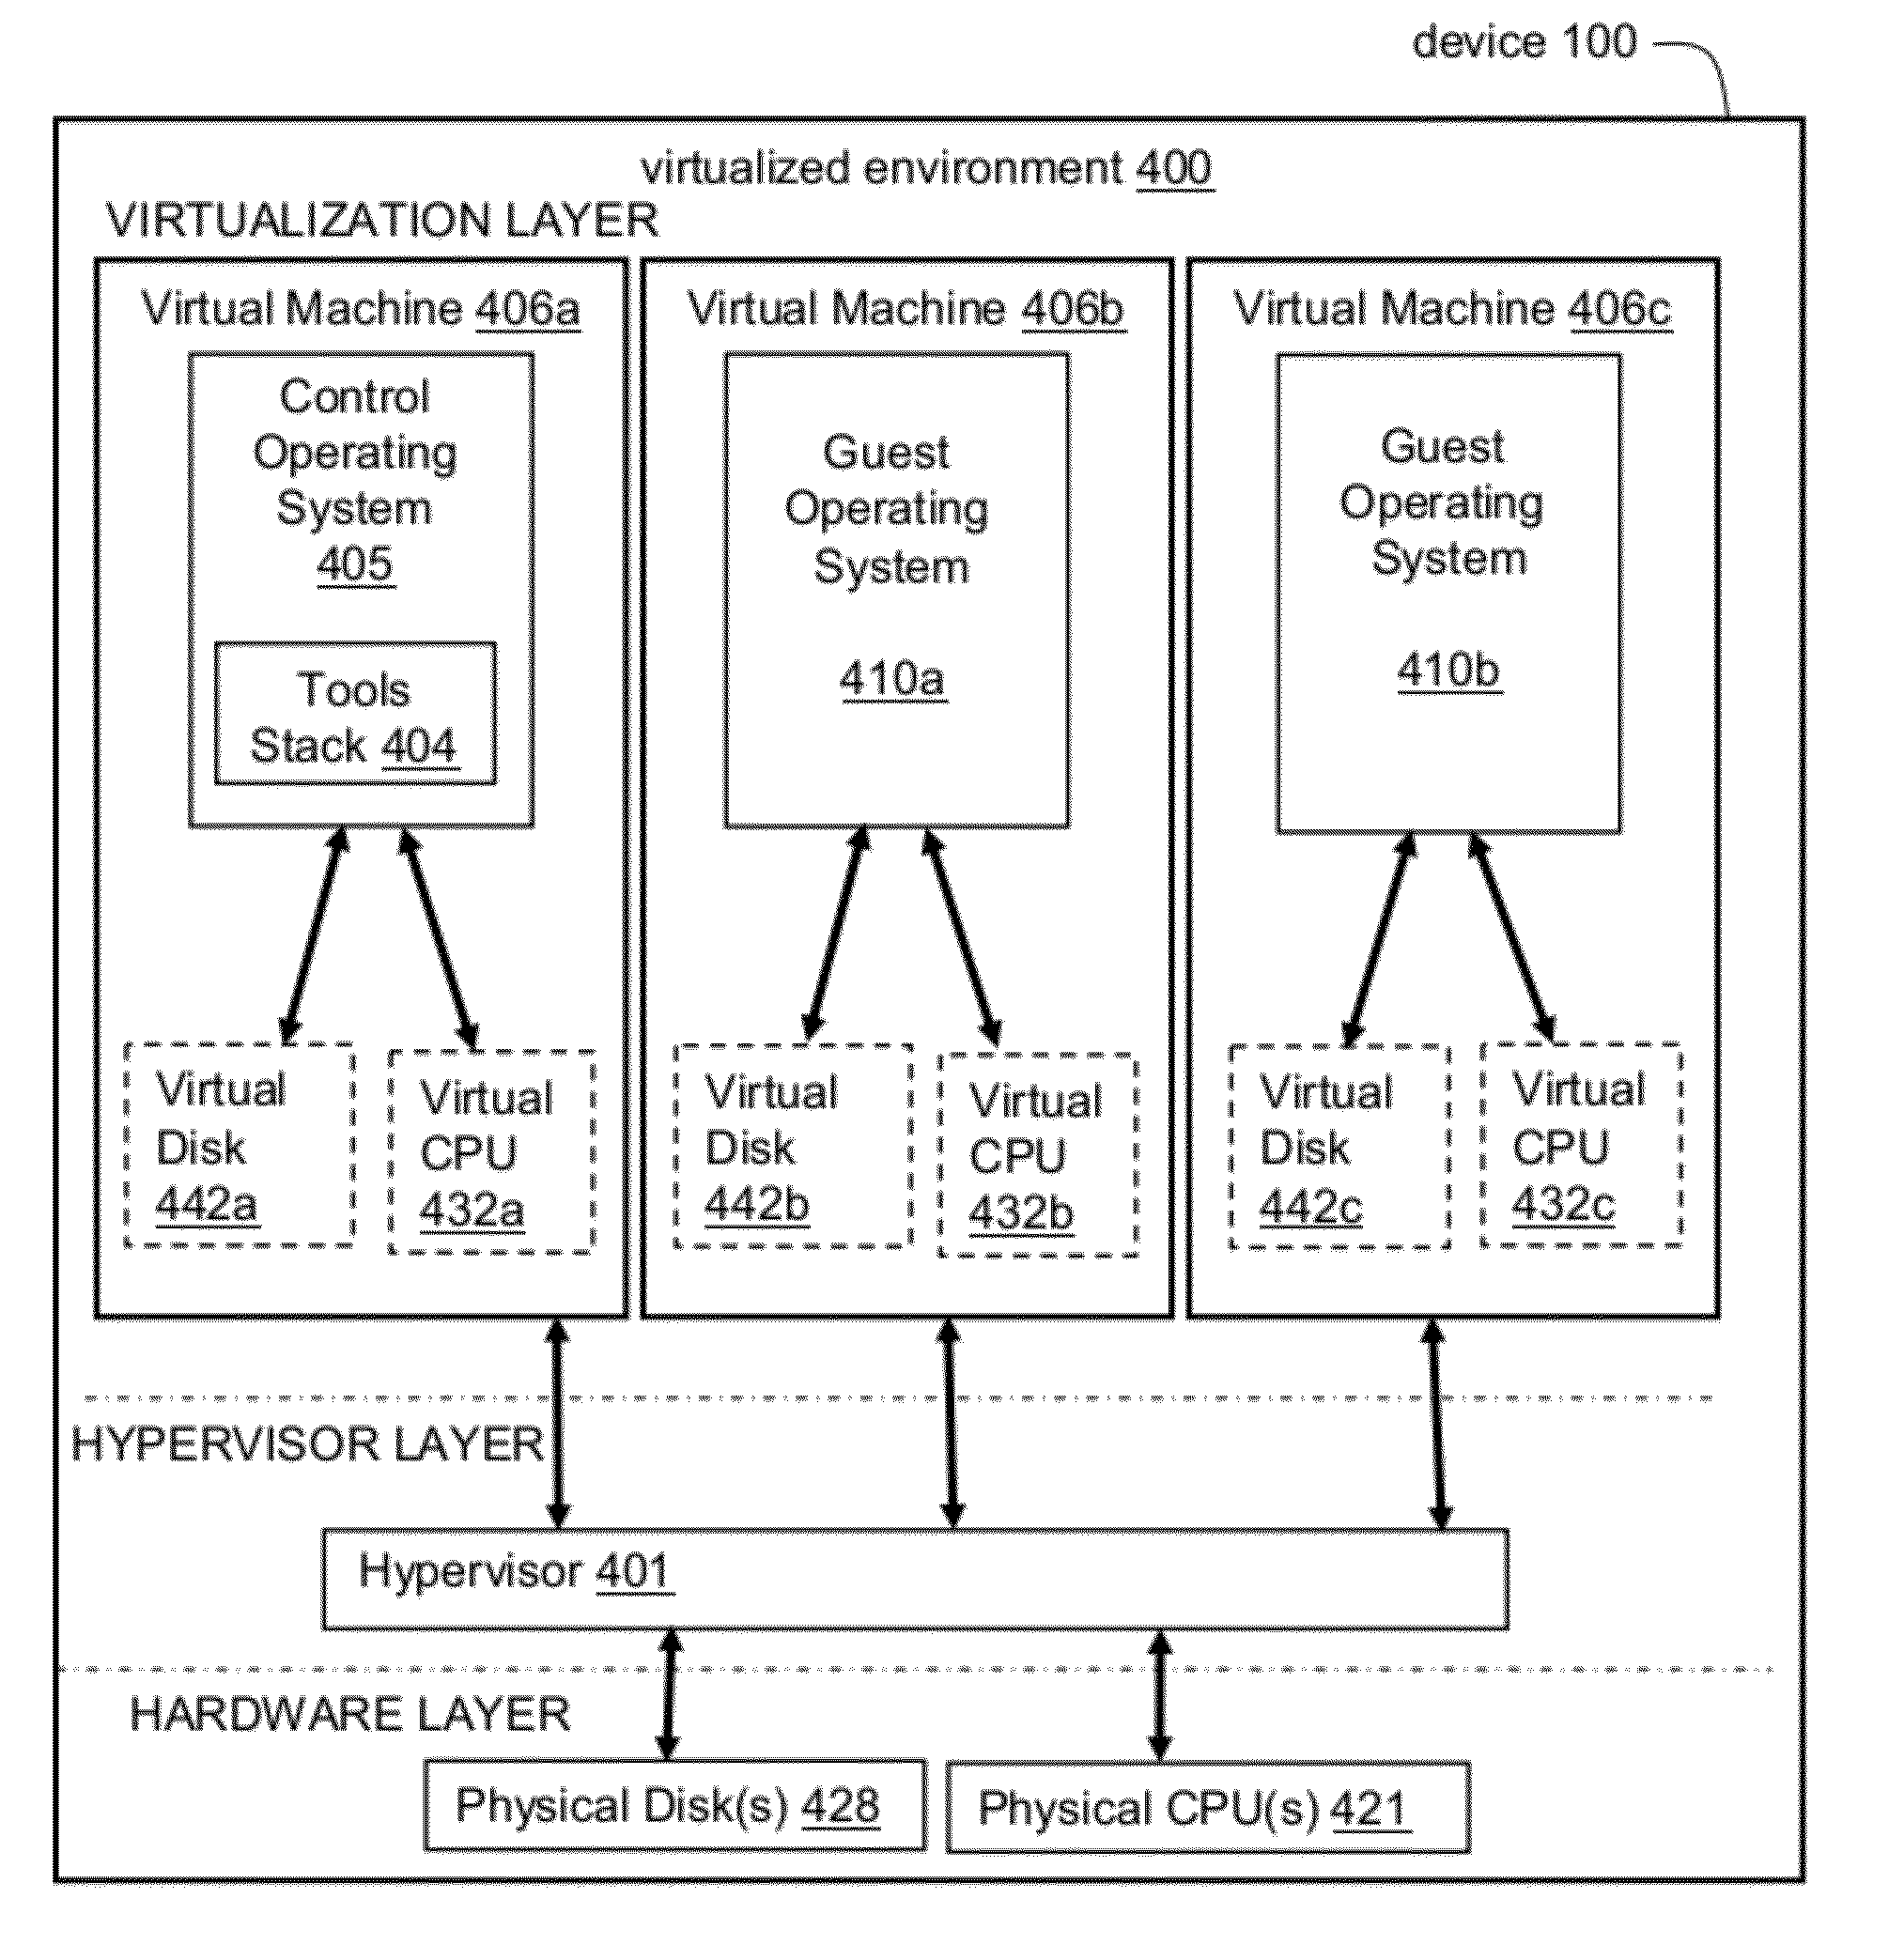 Systems and methods for sr-iov pass-thru via an intermediary device